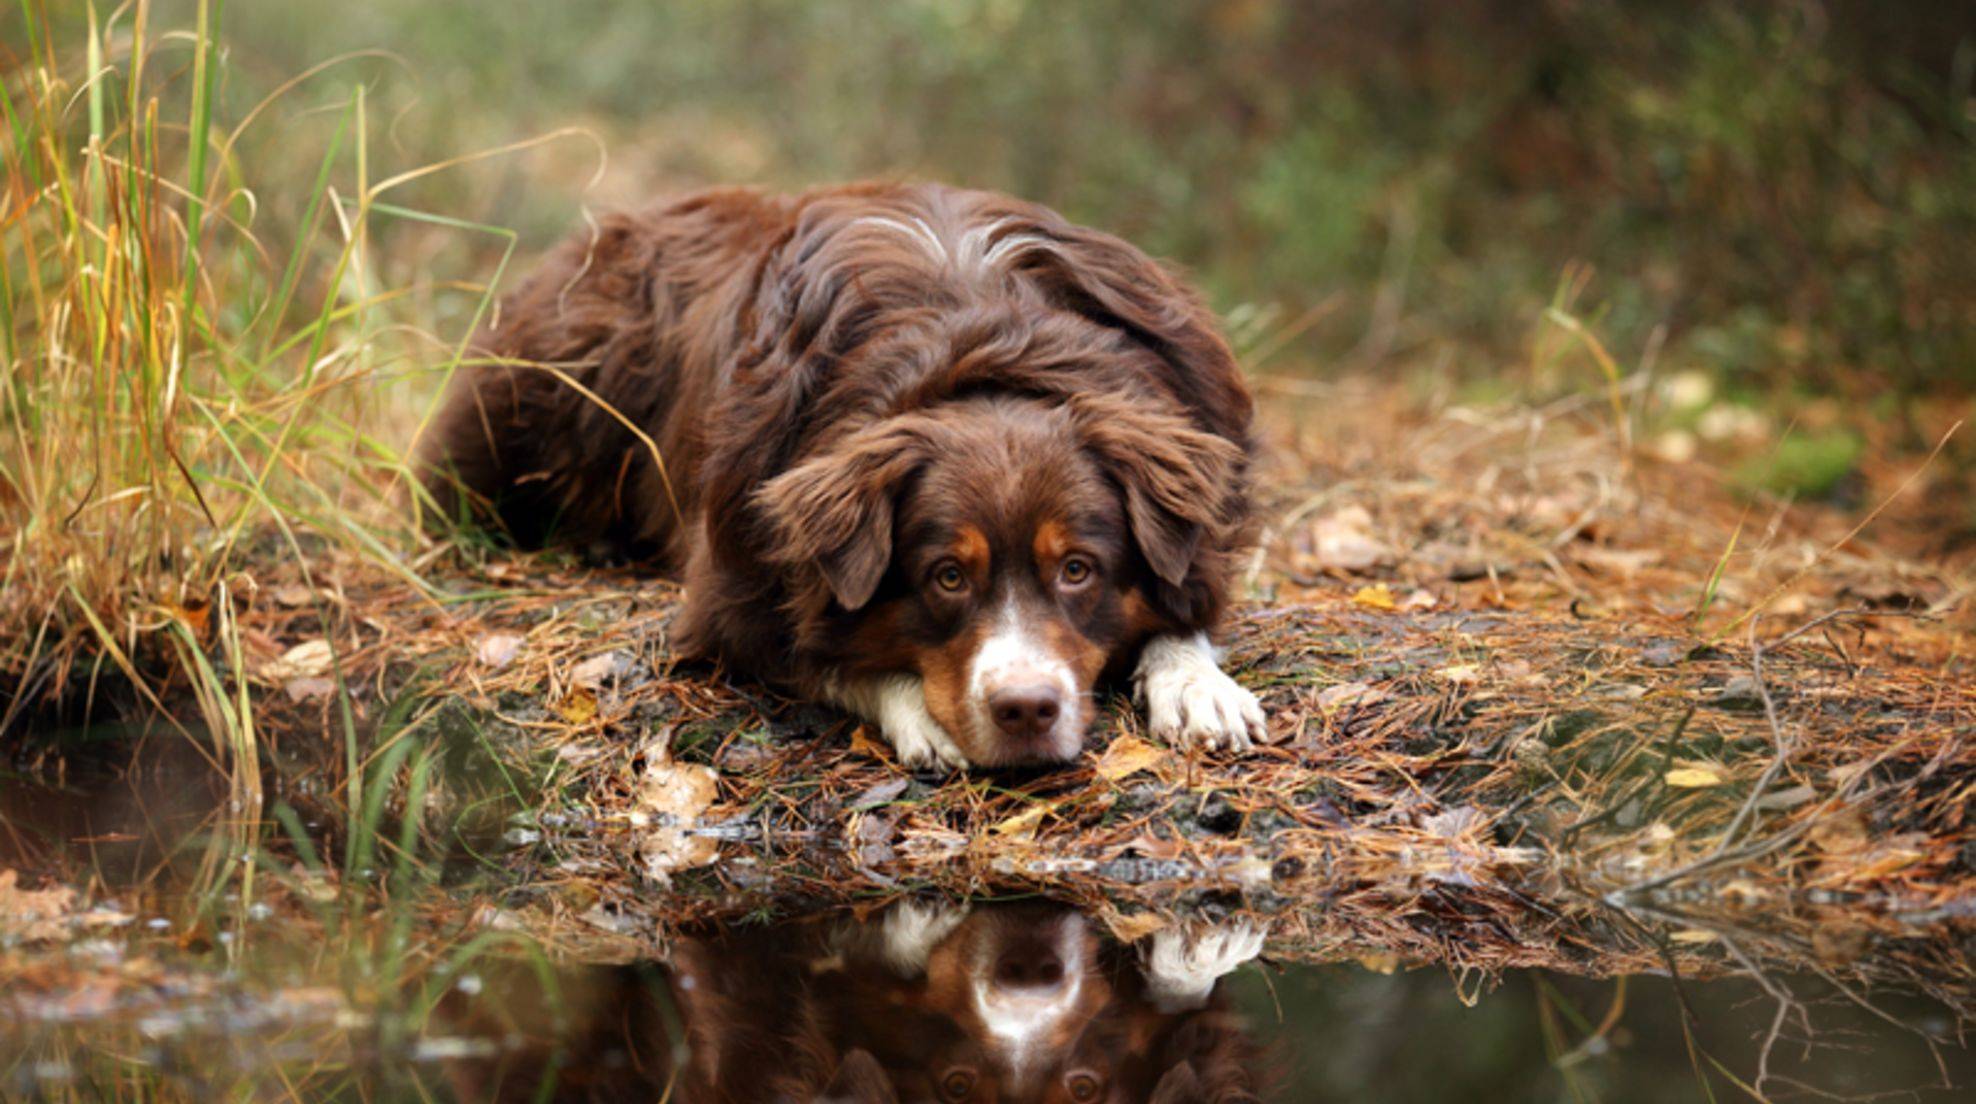 Why dogs should not drink from puddles